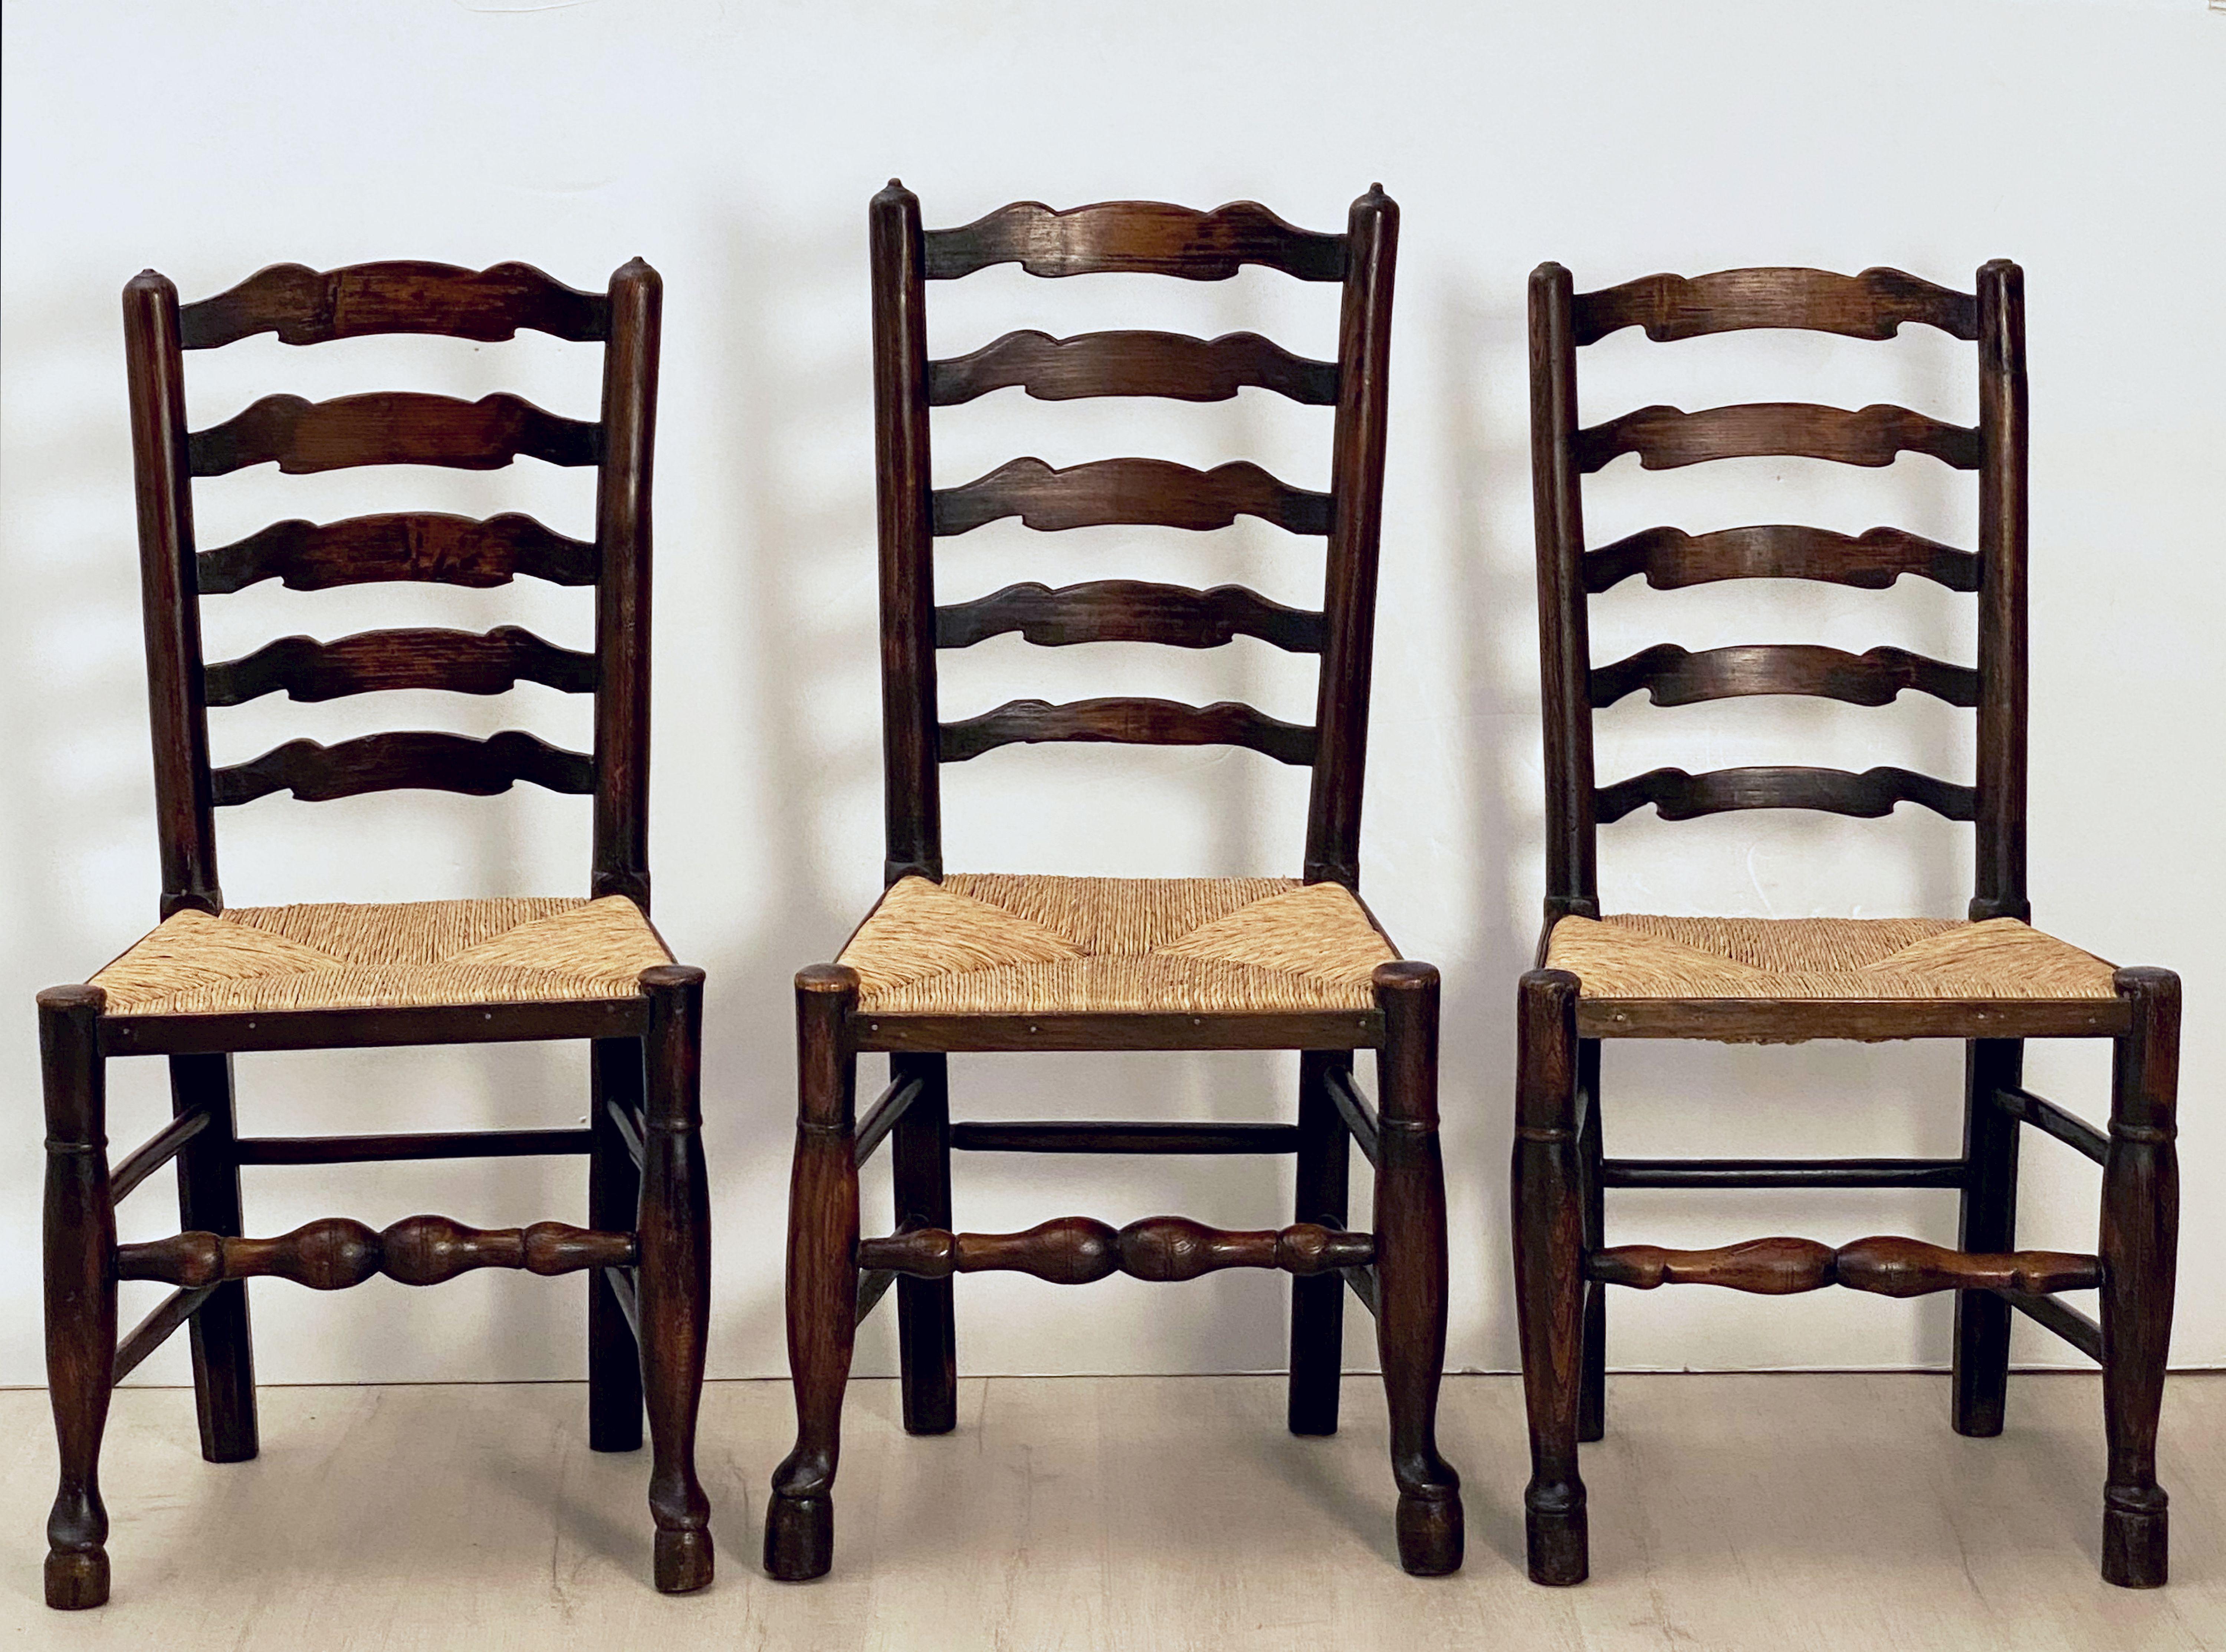 A fine set of six English ladder-back chairs with handsome woven rush seats.
Featuring nicely-turned slats on the backs and turned legs and supports, slight variation from chair to chair.

A Classic rustic English country or farm or cottage home